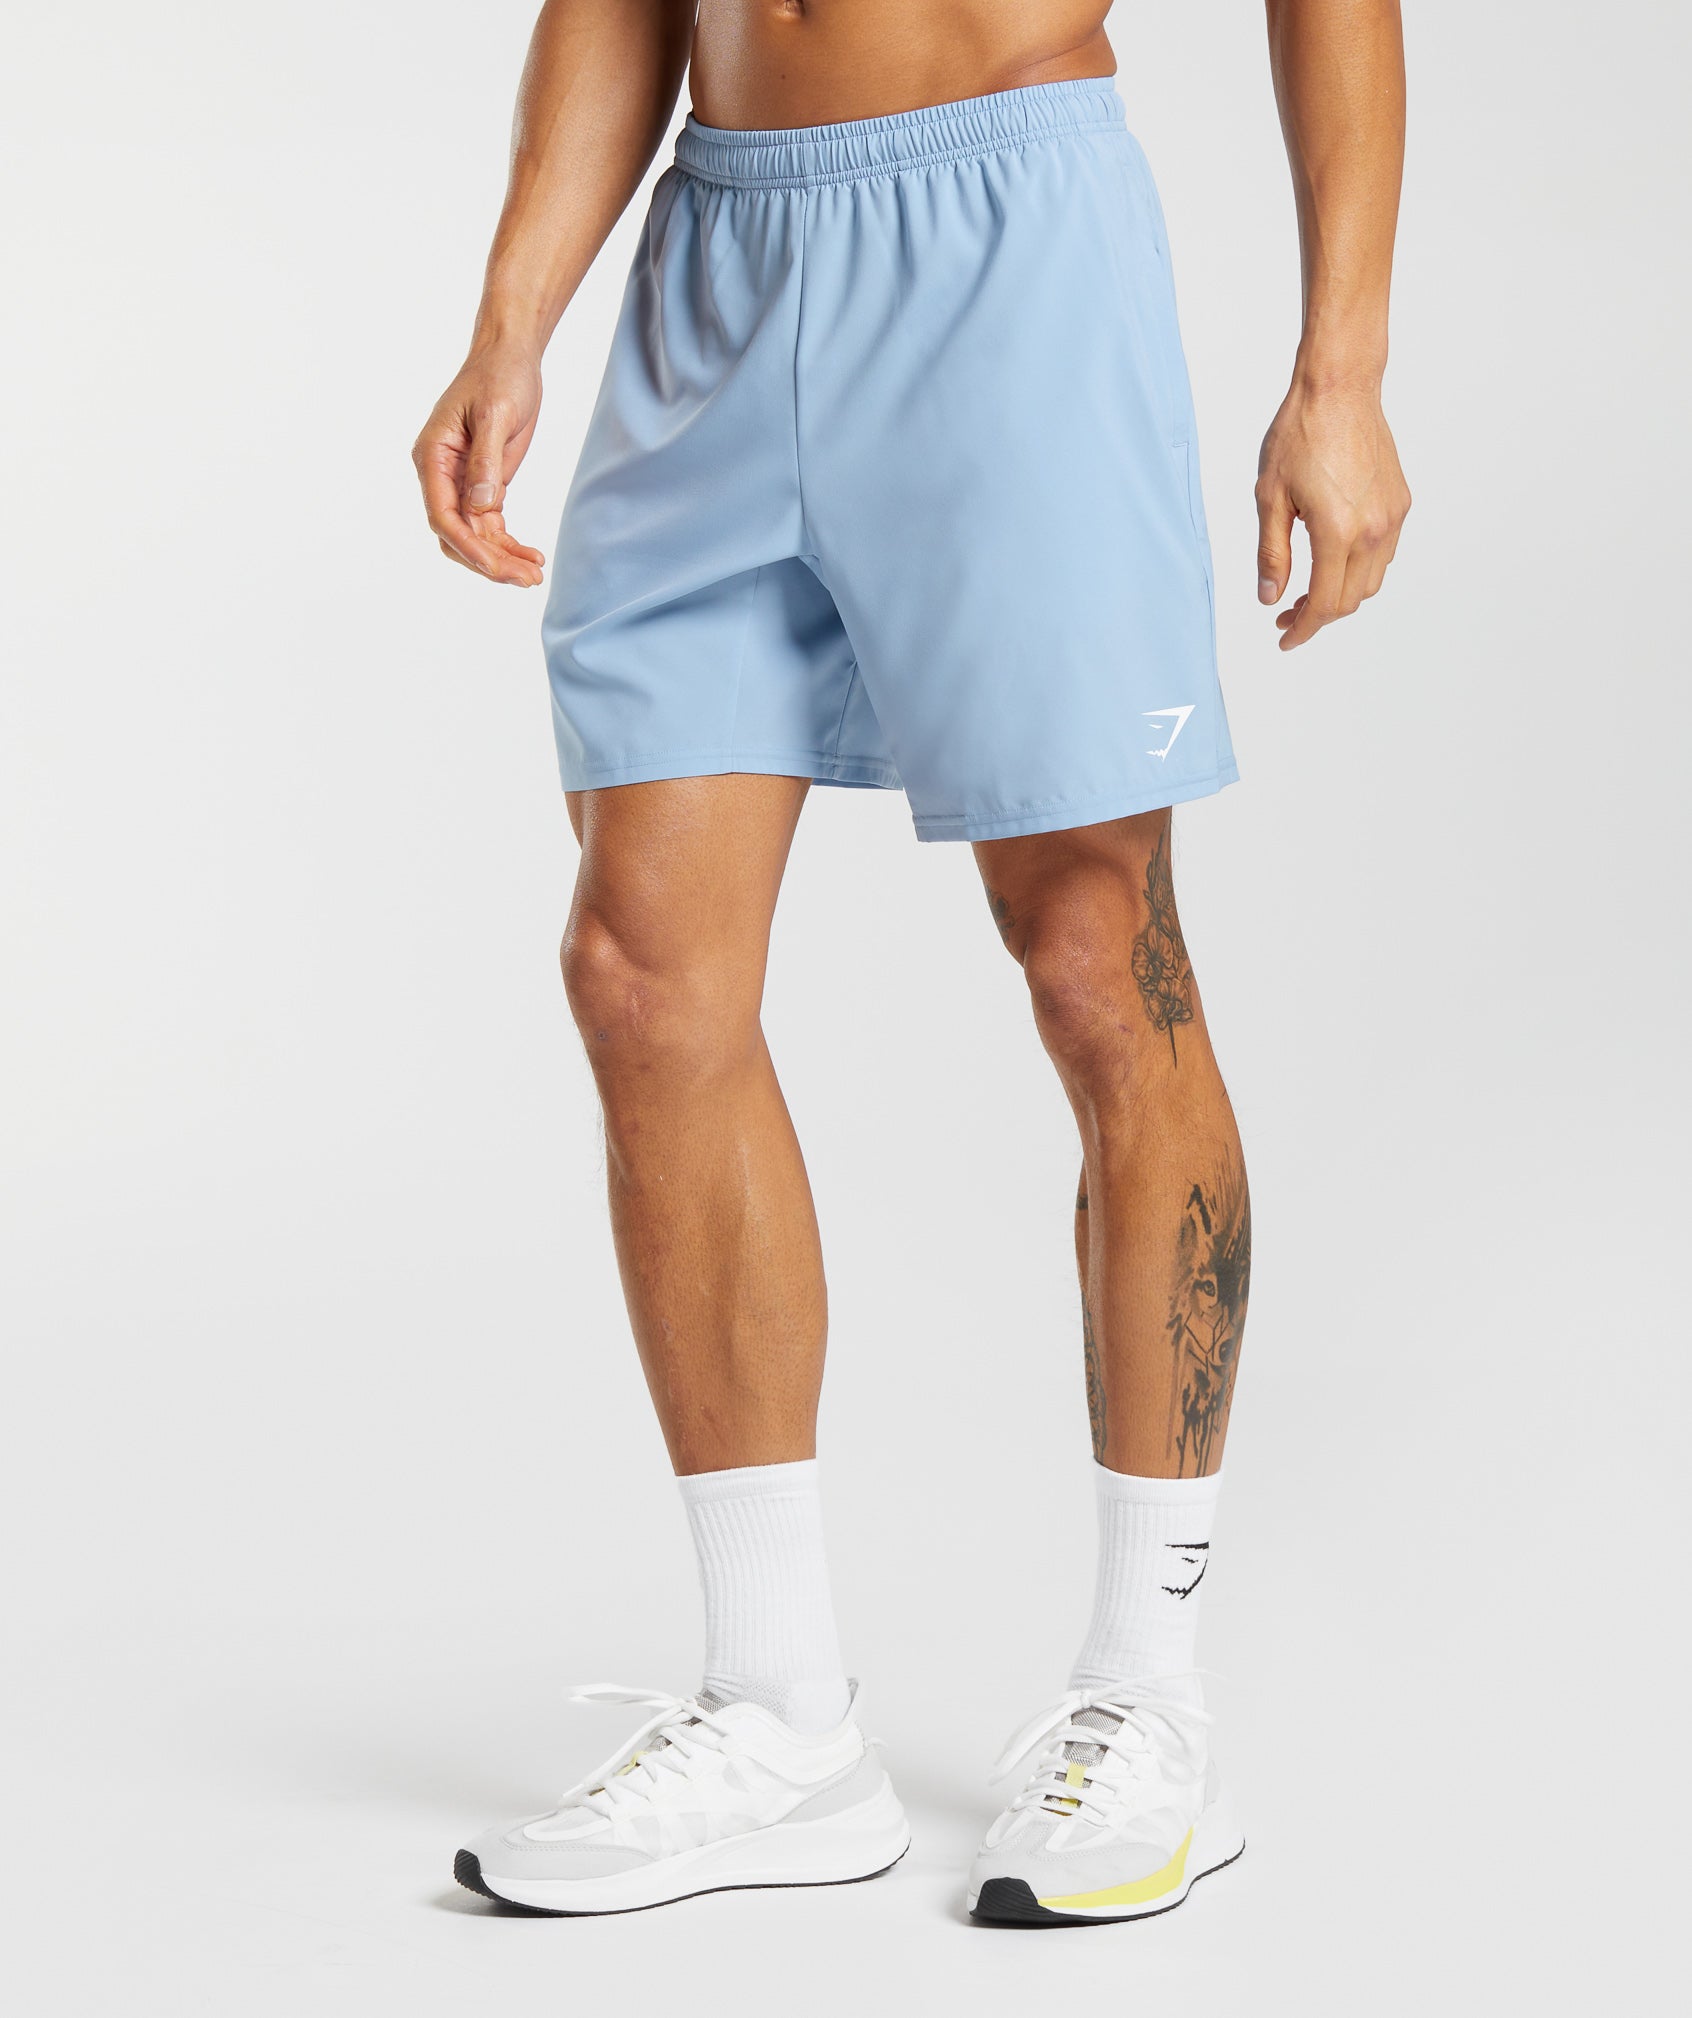 Arrival 7" Shorts in Ozone Blue - view 1